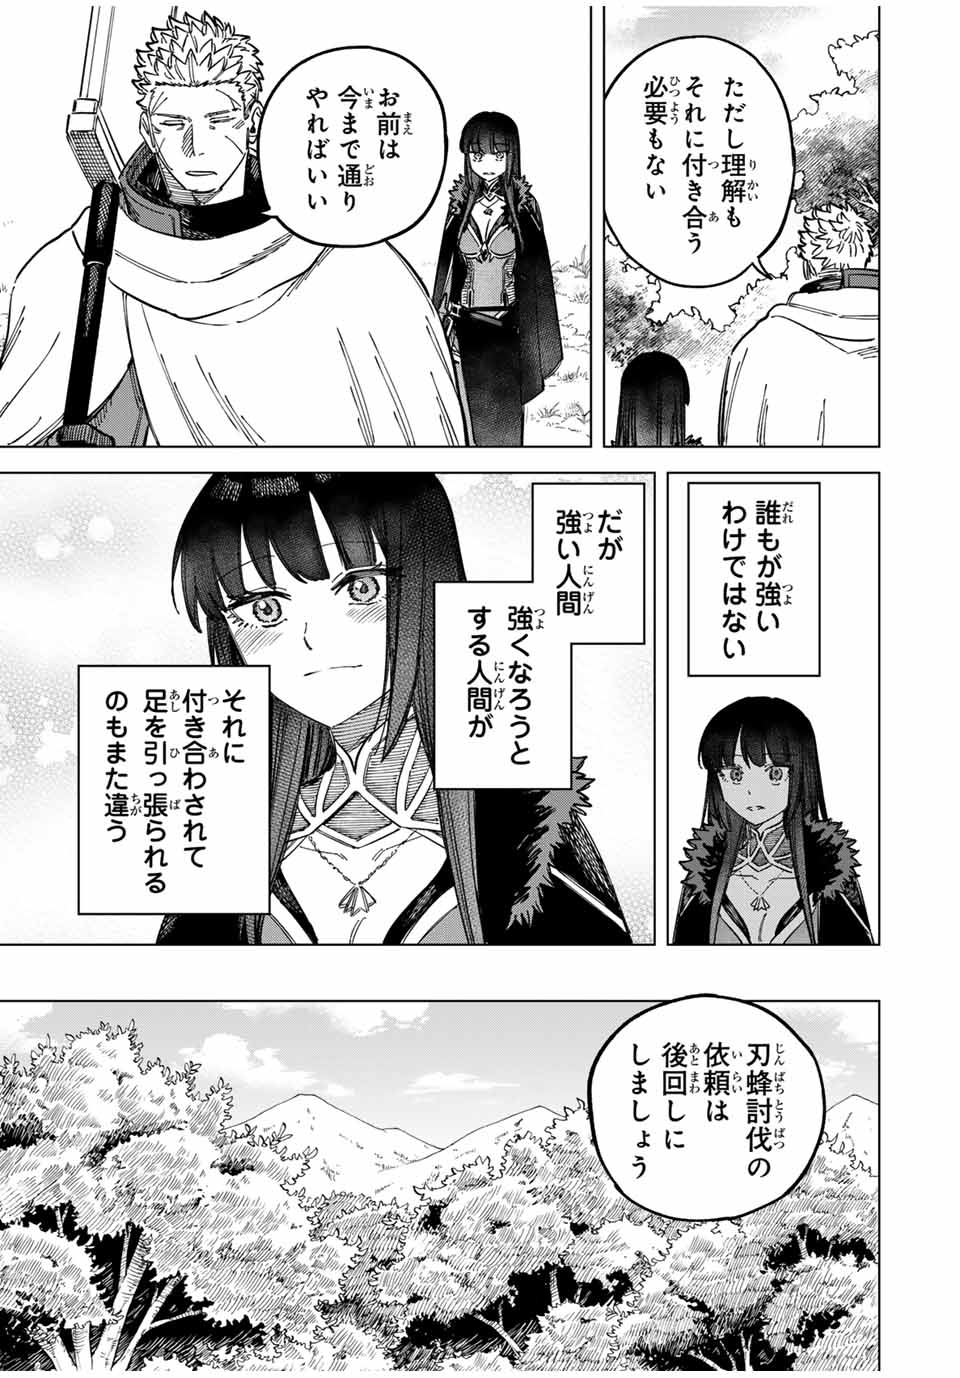 Witch and Mercenary 魔女と傭兵 第9.1話 - Page 9